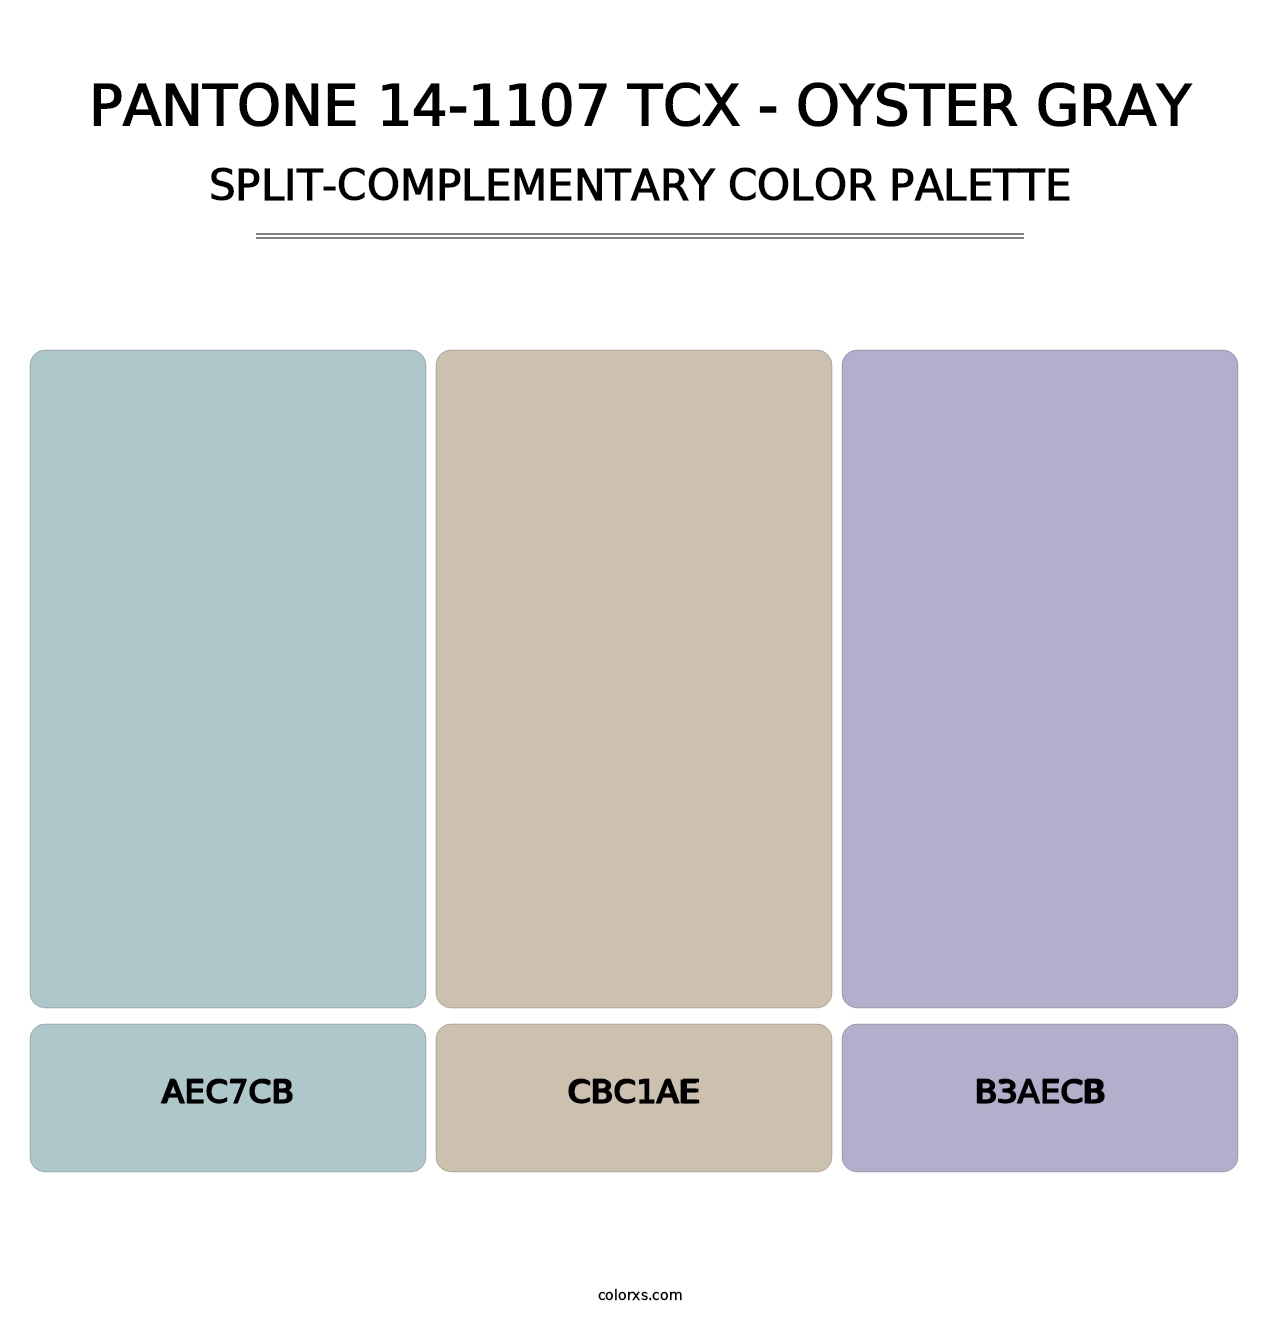 PANTONE 14-1107 TCX - Oyster Gray - Split-Complementary Color Palette